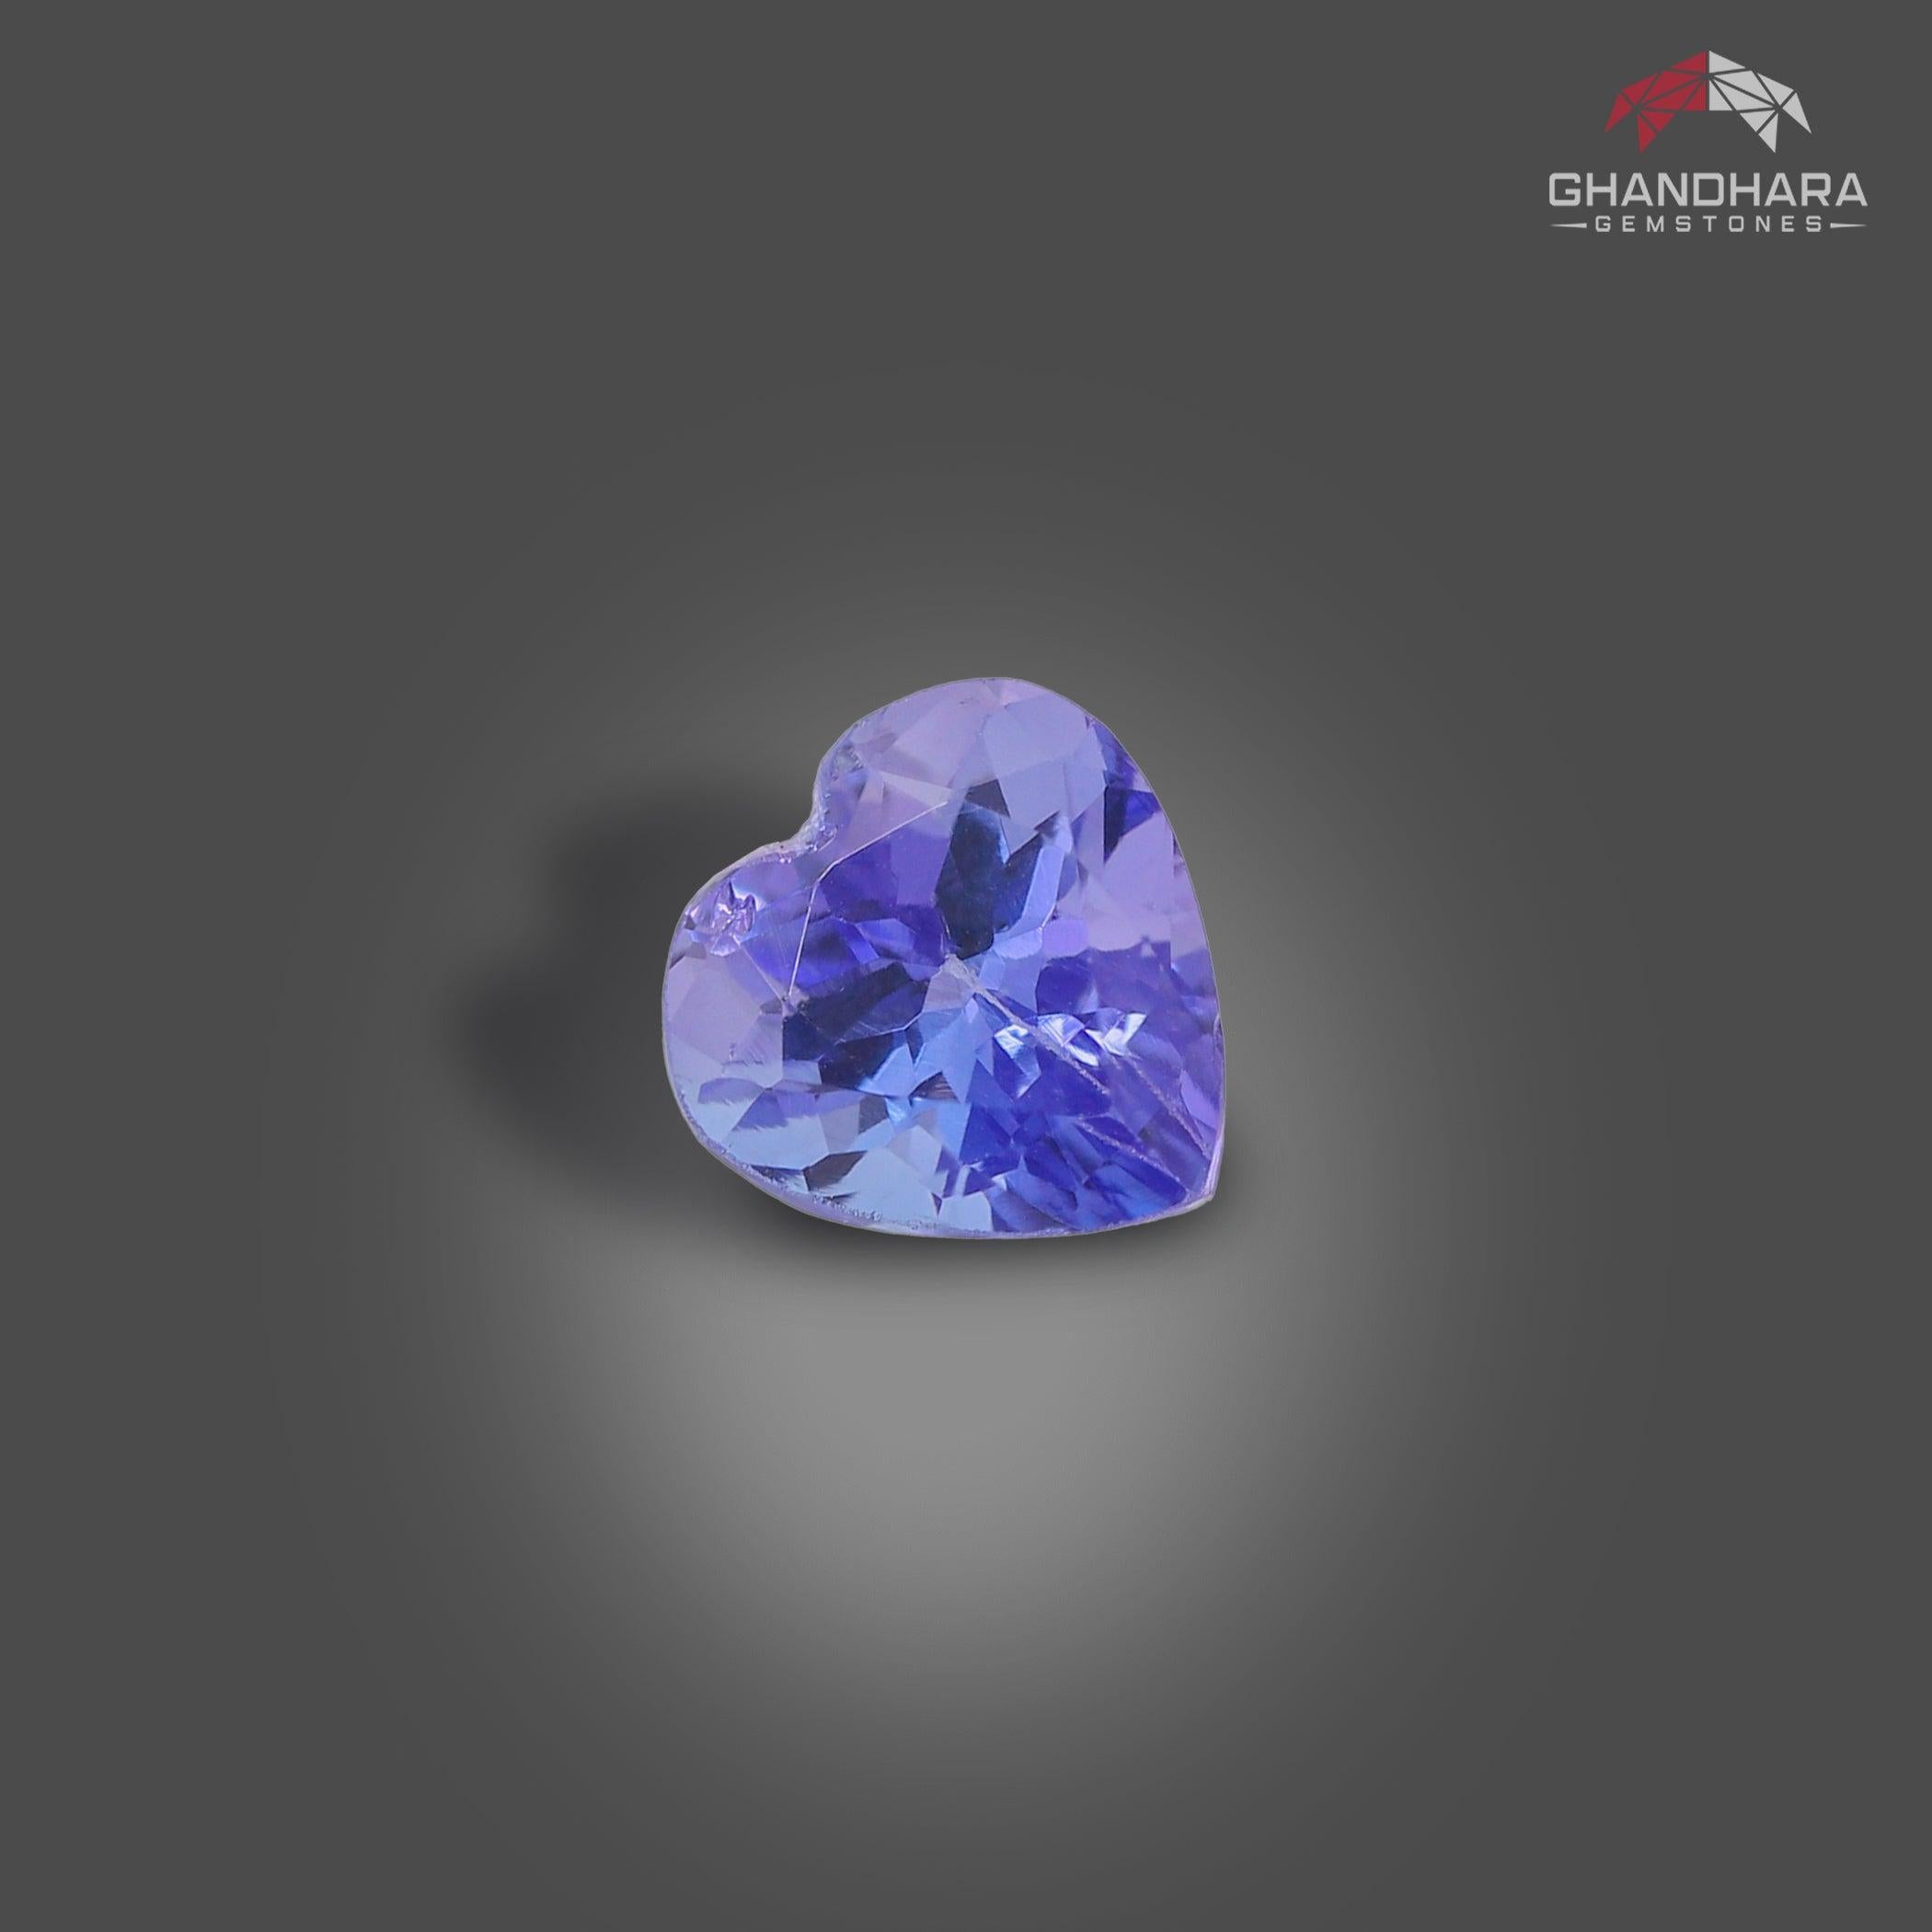 Purplish Blue Tanzanite Heart Shaped of 1.30 Carat from Tanzania has a wonderful cut in a heart shape, incredible blue color. Great brilliance. This gem is totally VVS Clarity.

 

Product Information:
GEMSTONE TYPE:	Purplish Blue Tanzanite Heart